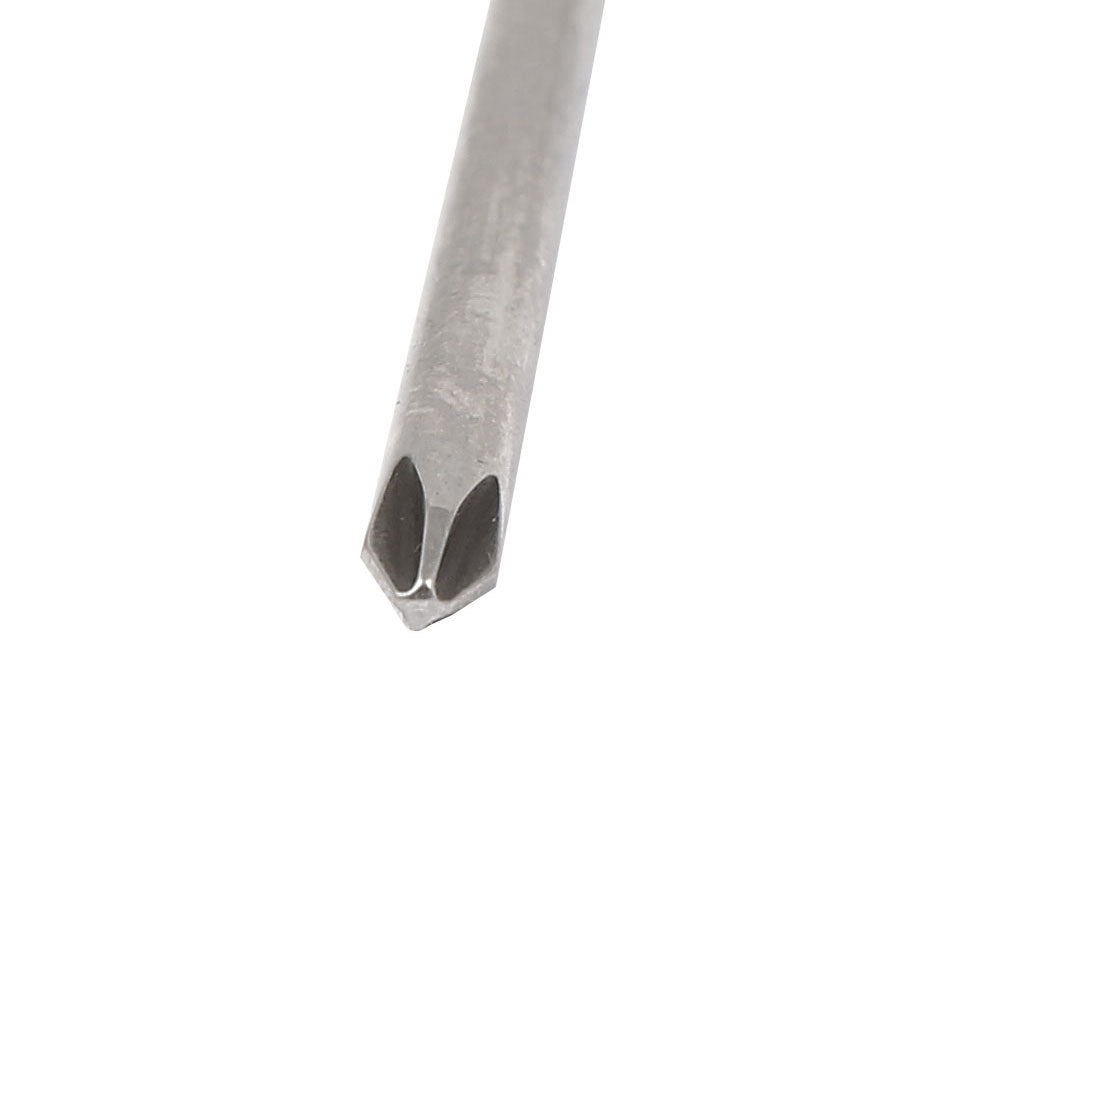 Uxcell Uxcell 150mm Long Hex Shank 4.5mm Tip PH1 Magnetic Phillips Screwdriver Bit